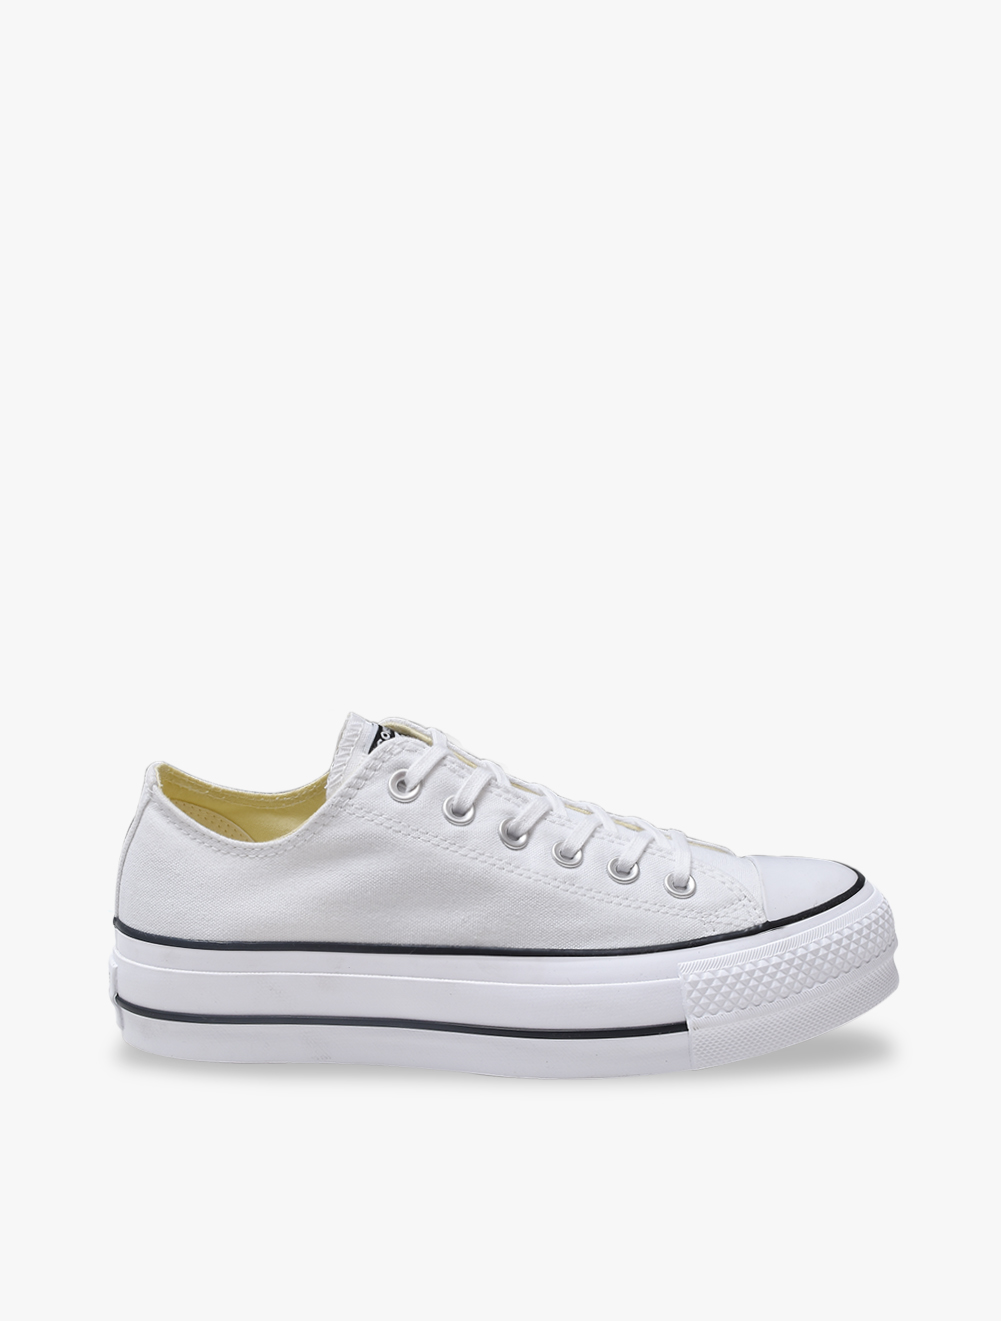 Shop Shoes \u0026 Accessories From Converse in Indonesia on Mapemall.com